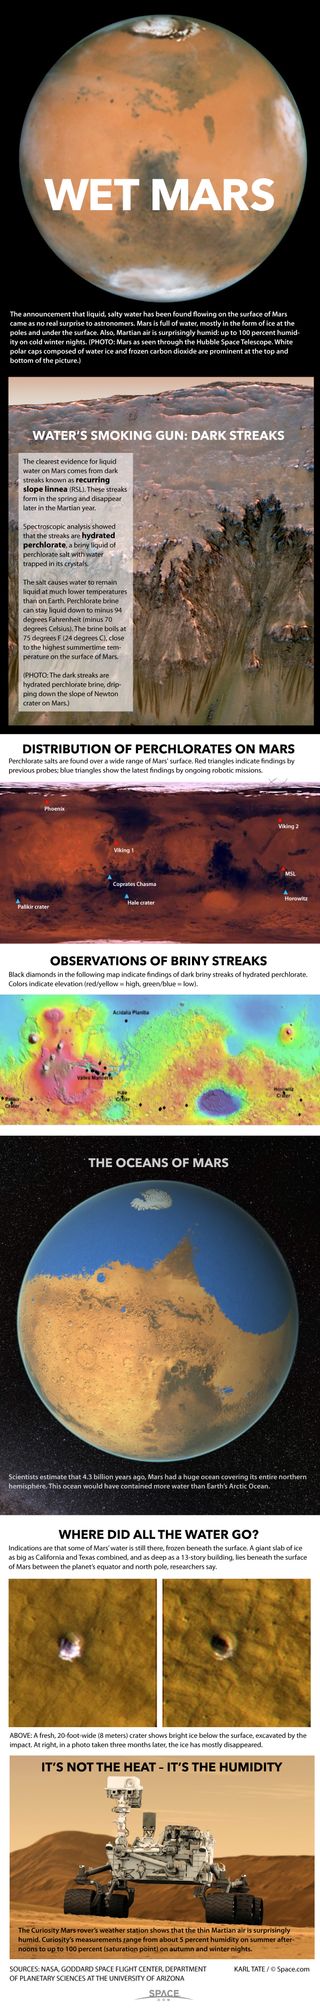 After decades of speculation, scientists now know for sure that liquid salty water flows on the surface of Mars. See the discovery explained in our full infographic.